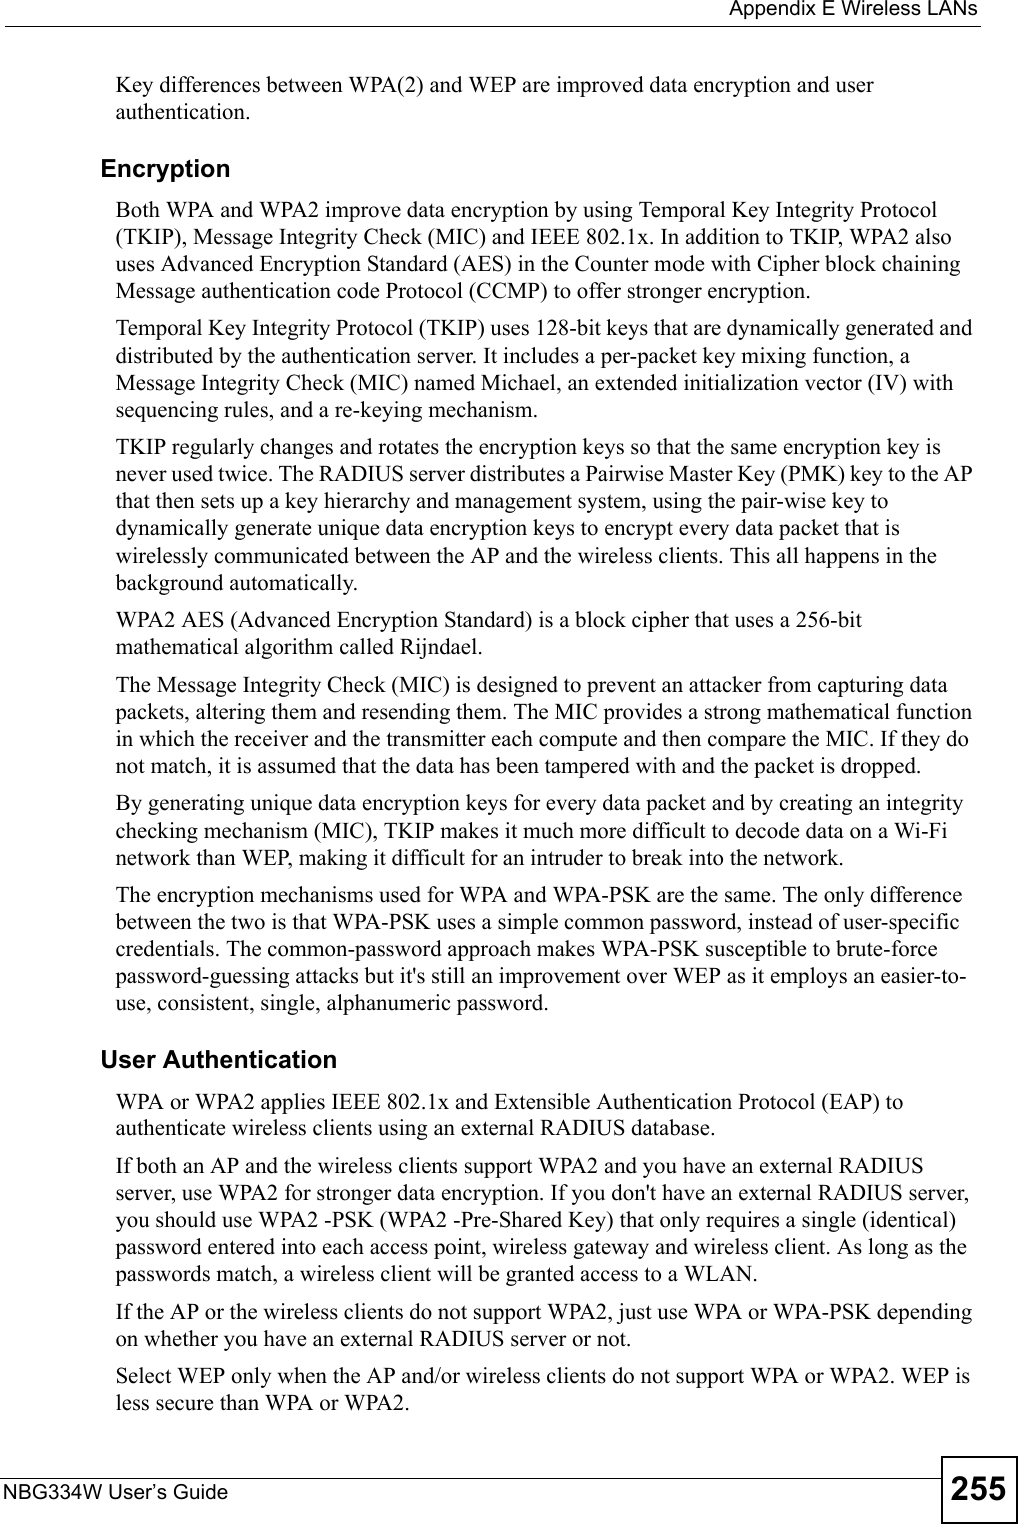  Appendix E Wireless LANsNBG334W User’s Guide 255Key differences between WPA(2) and WEP are improved data encryption and user authentication.              EncryptionBoth WPA and WPA2 improve data encryption by using Temporal Key Integrity Protocol (TKIP), Message Integrity Check (MIC) and IEEE 802.1x. In addition to TKIP, WPA2 also uses Advanced Encryption Standard (AES) in the Counter mode with Cipher block chaining Message authentication code Protocol (CCMP) to offer stronger encryption. Temporal Key Integrity Protocol (TKIP) uses 128-bit keys that are dynamically generated and distributed by the authentication server. It includes a per-packet key mixing function, a Message Integrity Check (MIC) named Michael, an extended initialization vector (IV) with sequencing rules, and a re-keying mechanism.TKIP regularly changes and rotates the encryption keys so that the same encryption key is never used twice. The RADIUS server distributes a Pairwise Master Key (PMK) key to the AP that then sets up a key hierarchy and management system, using the pair-wise key to dynamically generate unique data encryption keys to encrypt every data packet that is wirelessly communicated between the AP and the wireless clients. This all happens in the background automatically.WPA2 AES (Advanced Encryption Standard) is a block cipher that uses a 256-bit mathematical algorithm called Rijndael.The Message Integrity Check (MIC) is designed to prevent an attacker from capturing data packets, altering them and resending them. The MIC provides a strong mathematical function in which the receiver and the transmitter each compute and then compare the MIC. If they do not match, it is assumed that the data has been tampered with and the packet is dropped. By generating unique data encryption keys for every data packet and by creating an integrity checking mechanism (MIC), TKIP makes it much more difficult to decode data on a Wi-Fi network than WEP, making it difficult for an intruder to break into the network. The encryption mechanisms used for WPA and WPA-PSK are the same. The only difference between the two is that WPA-PSK uses a simple common password, instead of user-specific credentials. The common-password approach makes WPA-PSK susceptible to brute-force password-guessing attacks but it&apos;s still an improvement over WEP as it employs an easier-to-use, consistent, single, alphanumeric password.              User AuthenticationWPA or WPA2 applies IEEE 802.1x and Extensible Authentication Protocol (EAP) to authenticate wireless clients using an external RADIUS database. If both an AP and the wireless clients support WPA2 and you have an external RADIUS server, use WPA2 for stronger data encryption. If you don&apos;t have an external RADIUS server, you should use WPA2 -PSK (WPA2 -Pre-Shared Key) that only requires a single (identical) password entered into each access point, wireless gateway and wireless client. As long as the passwords match, a wireless client will be granted access to a WLAN. If the AP or the wireless clients do not support WPA2, just use WPA or WPA-PSK depending on whether you have an external RADIUS server or not.Select WEP only when the AP and/or wireless clients do not support WPA or WPA2. WEP is less secure than WPA or WPA2.